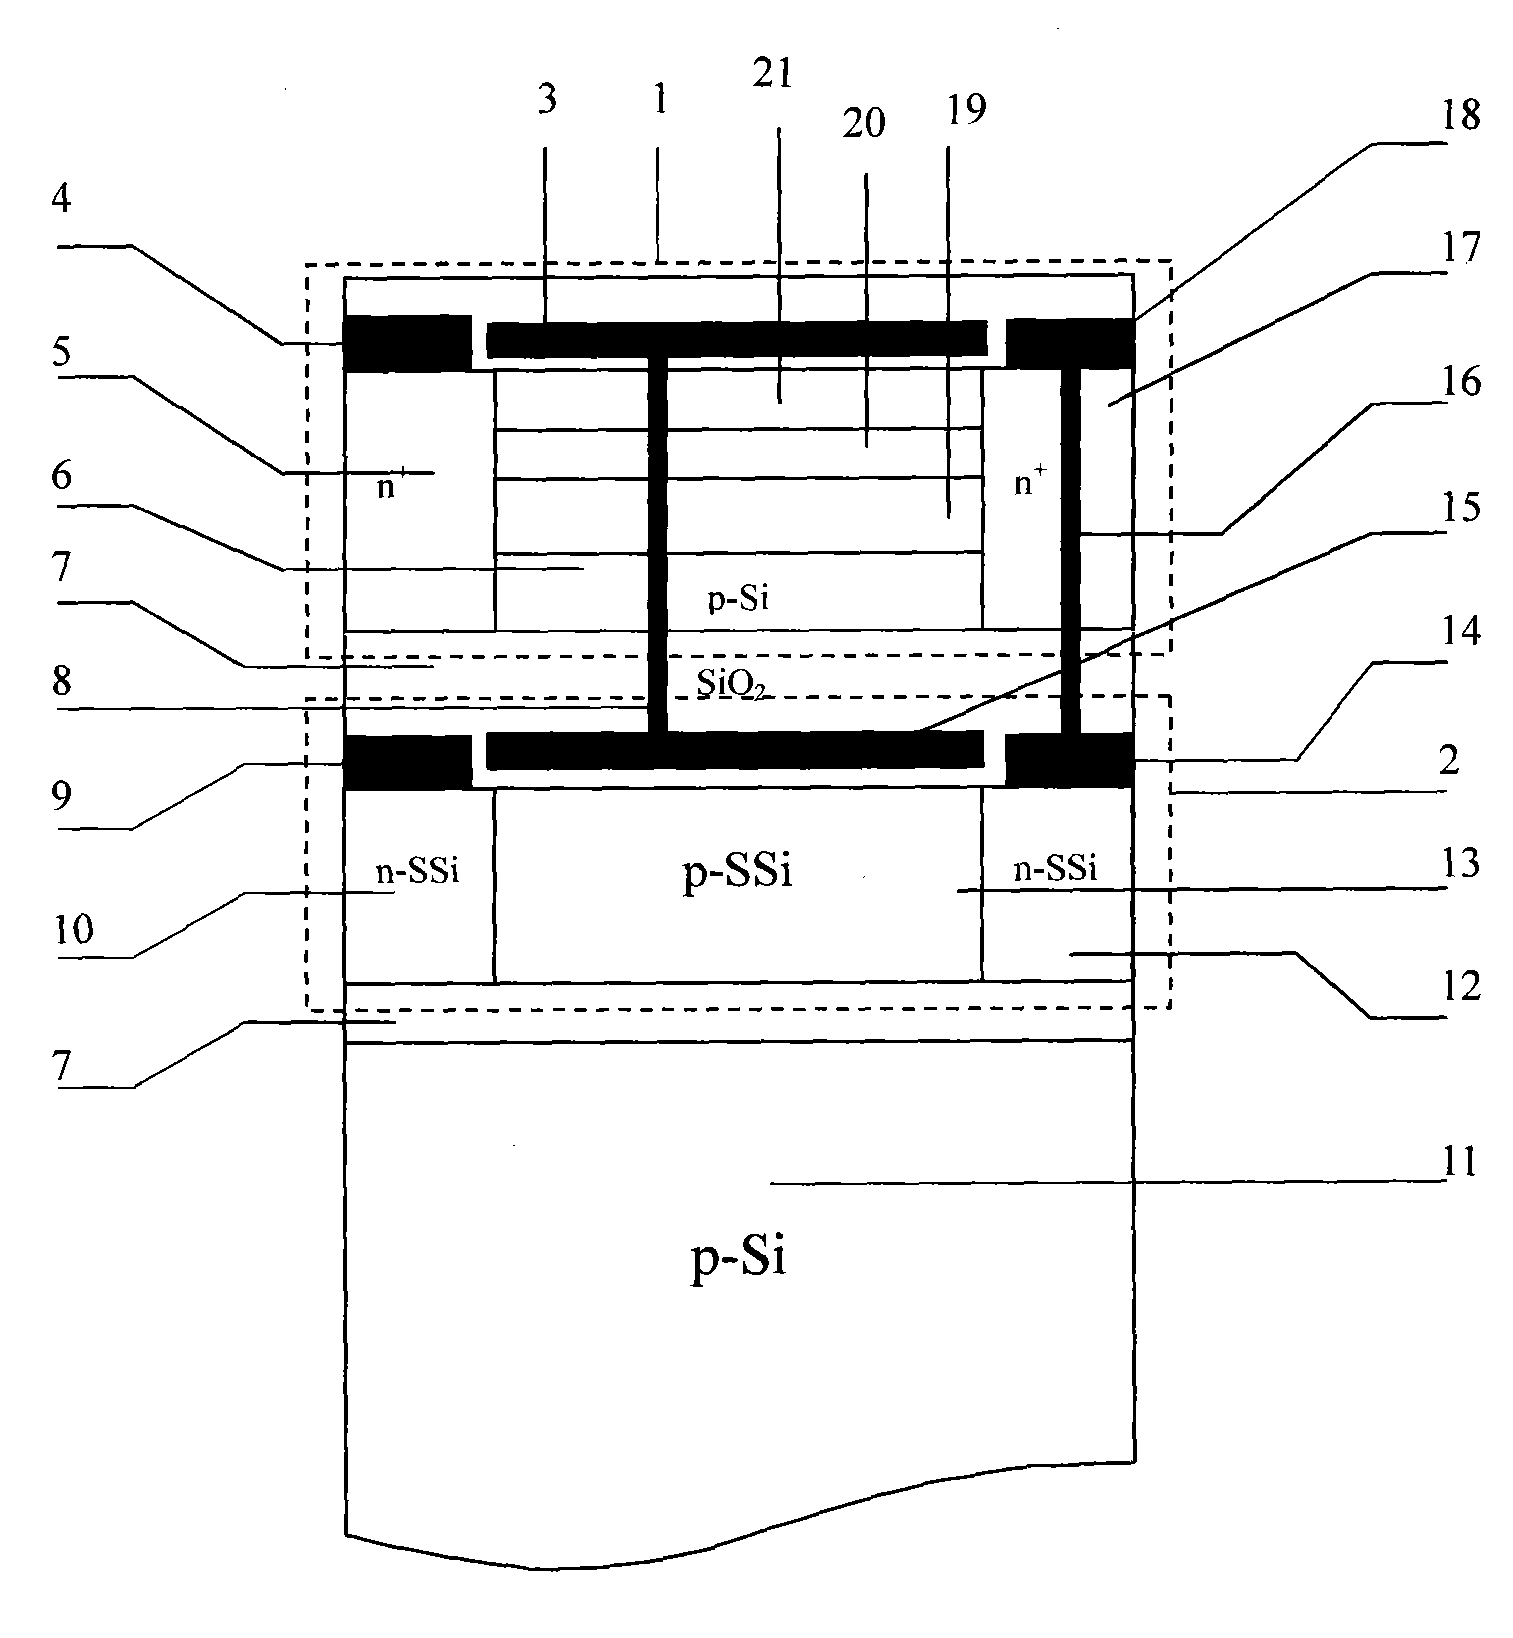 Three-dimensional strain NMOS integrated device and preparation method thereof